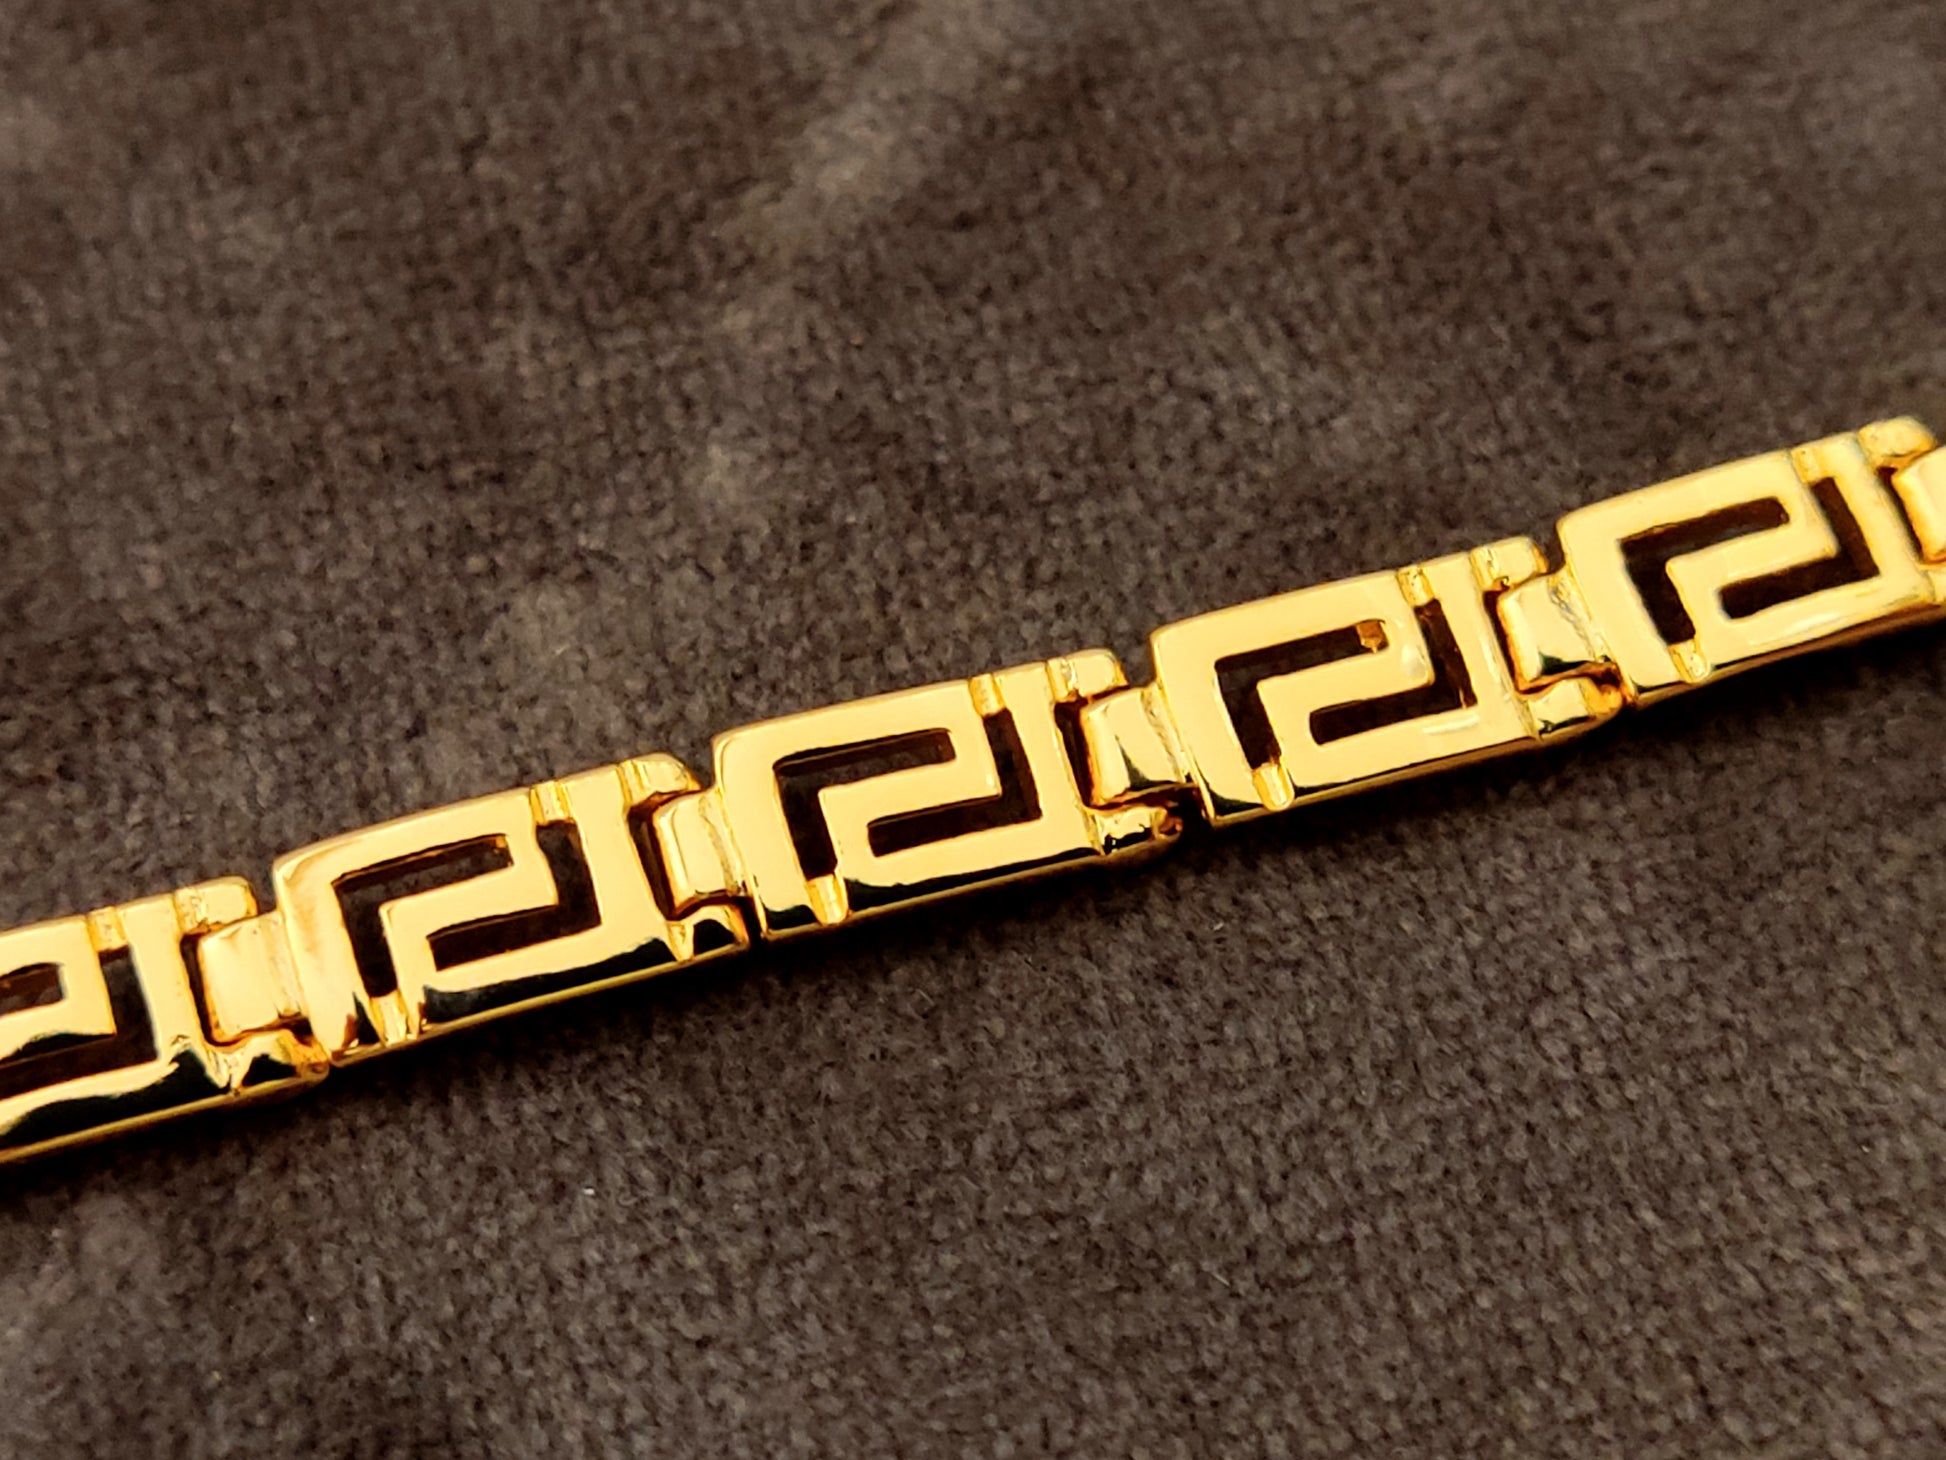 Greek Key silver bracelet with gold plated finish measuring 5mm width.